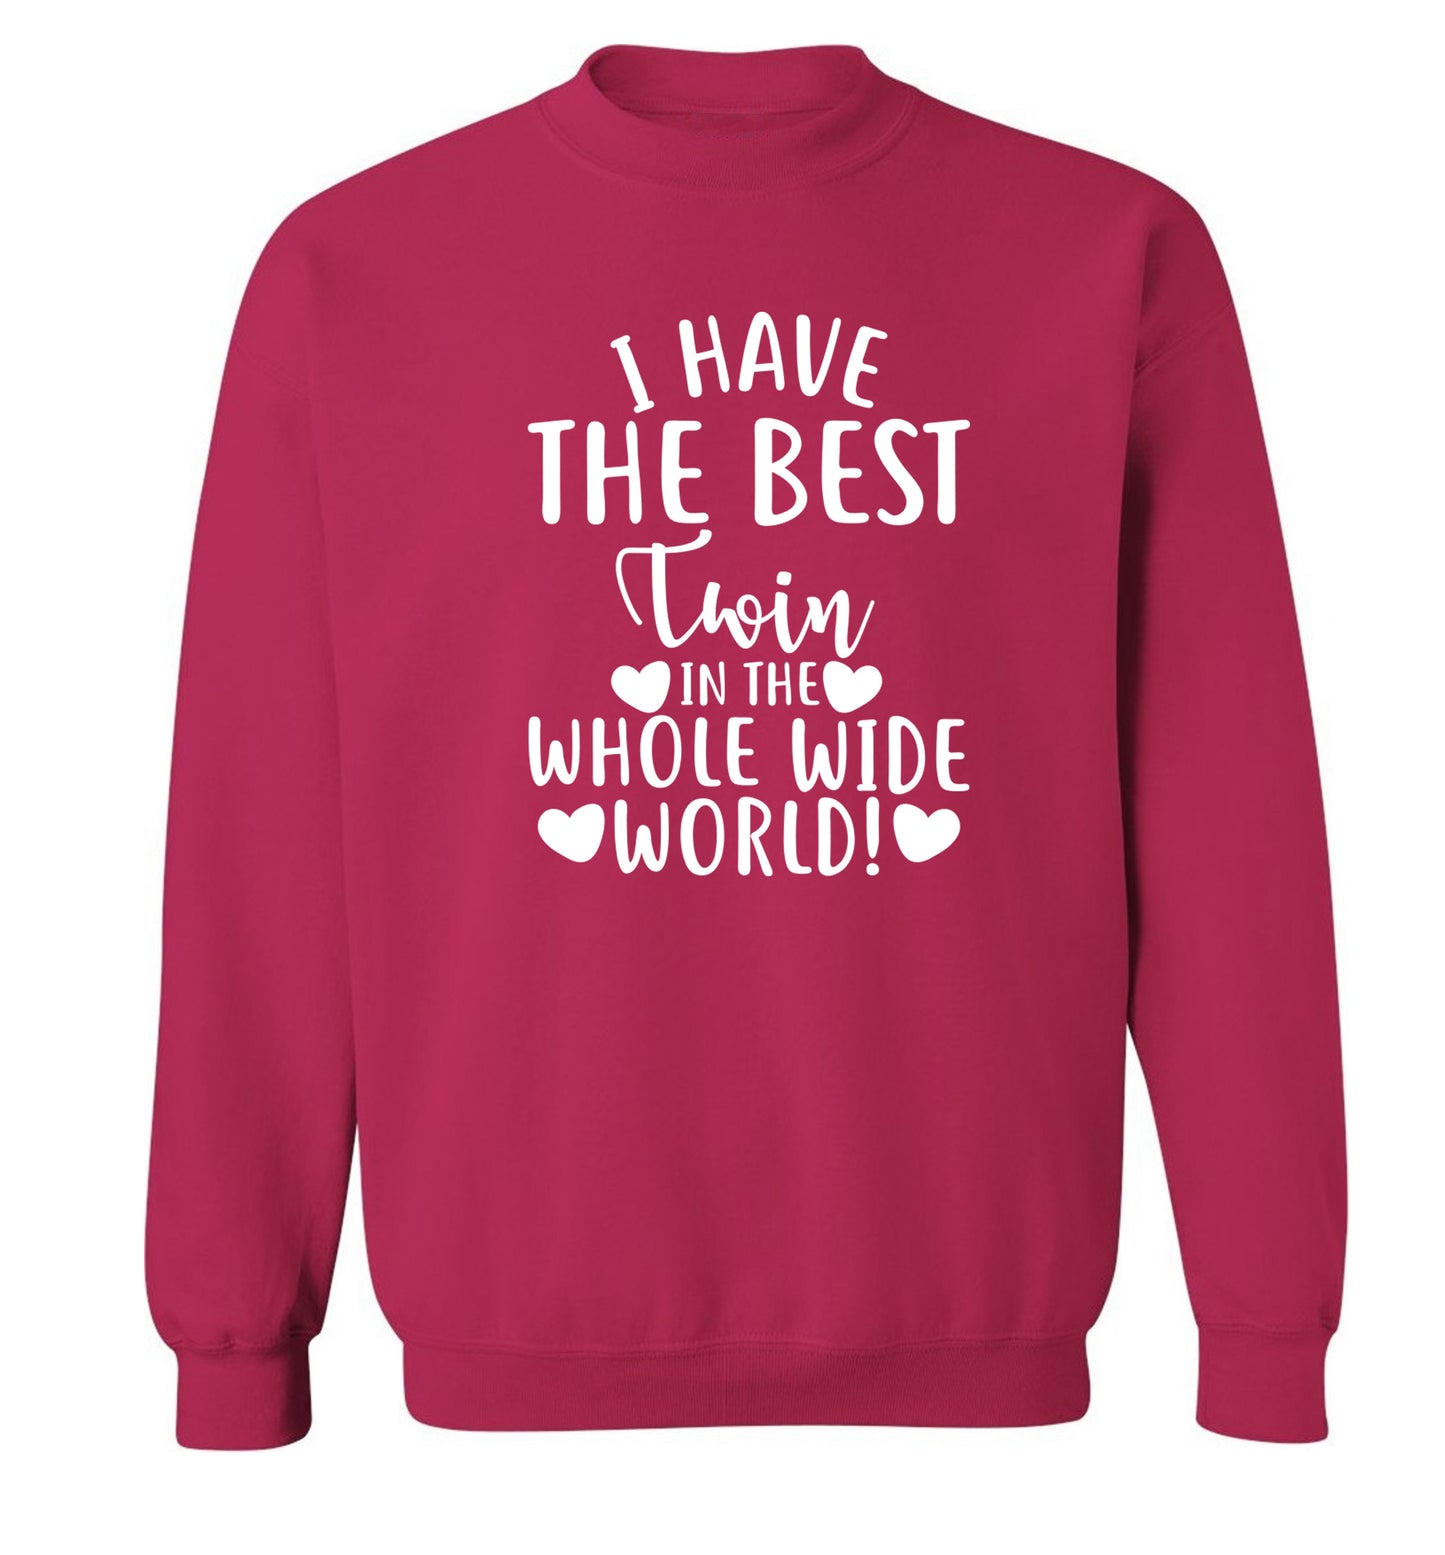 I have the best twin in the whole wide world! Adult's unisex pink Sweater 2XL